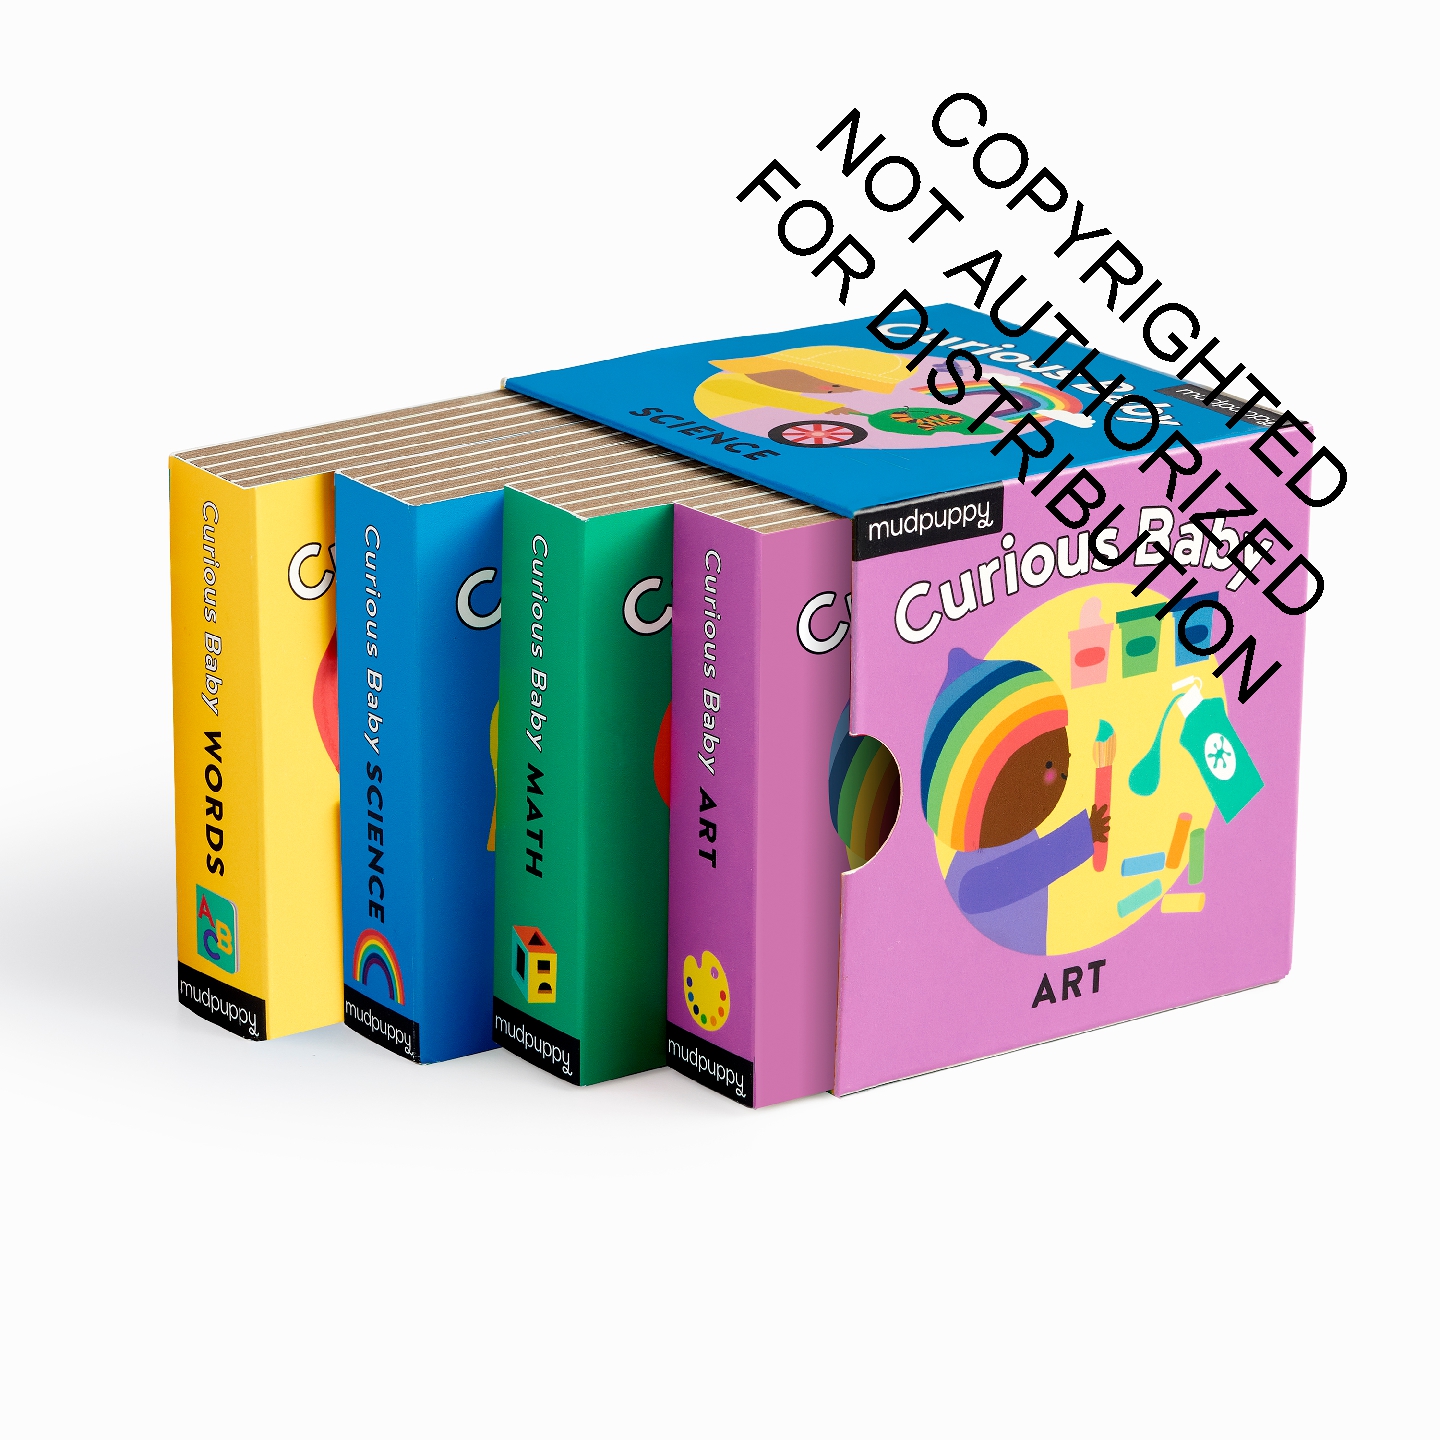 Curious Baby Board Book Set